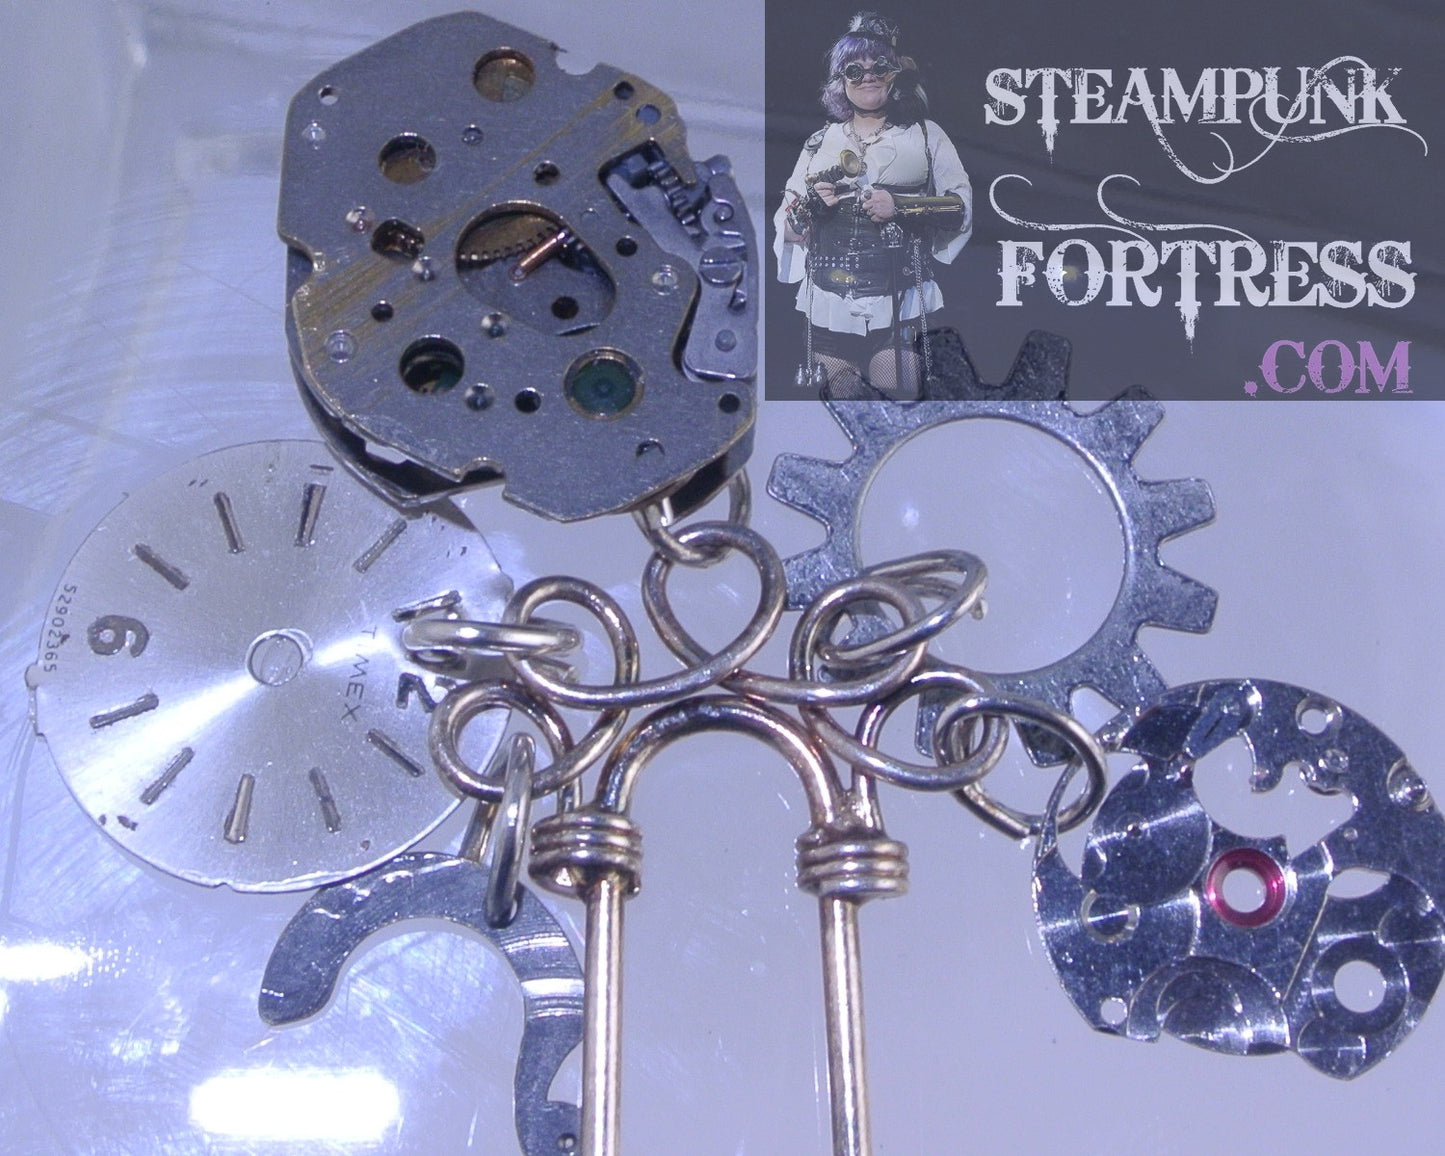 HAIR PICK SILVER 5 CHARMS MOVEMENT 2 PARTIAL AUTHENTIC GENUINE CLOCK WATCH MOVEMENTS GEAR FACE DIAL STARR WILDE STEAMPUNK FORTRESS